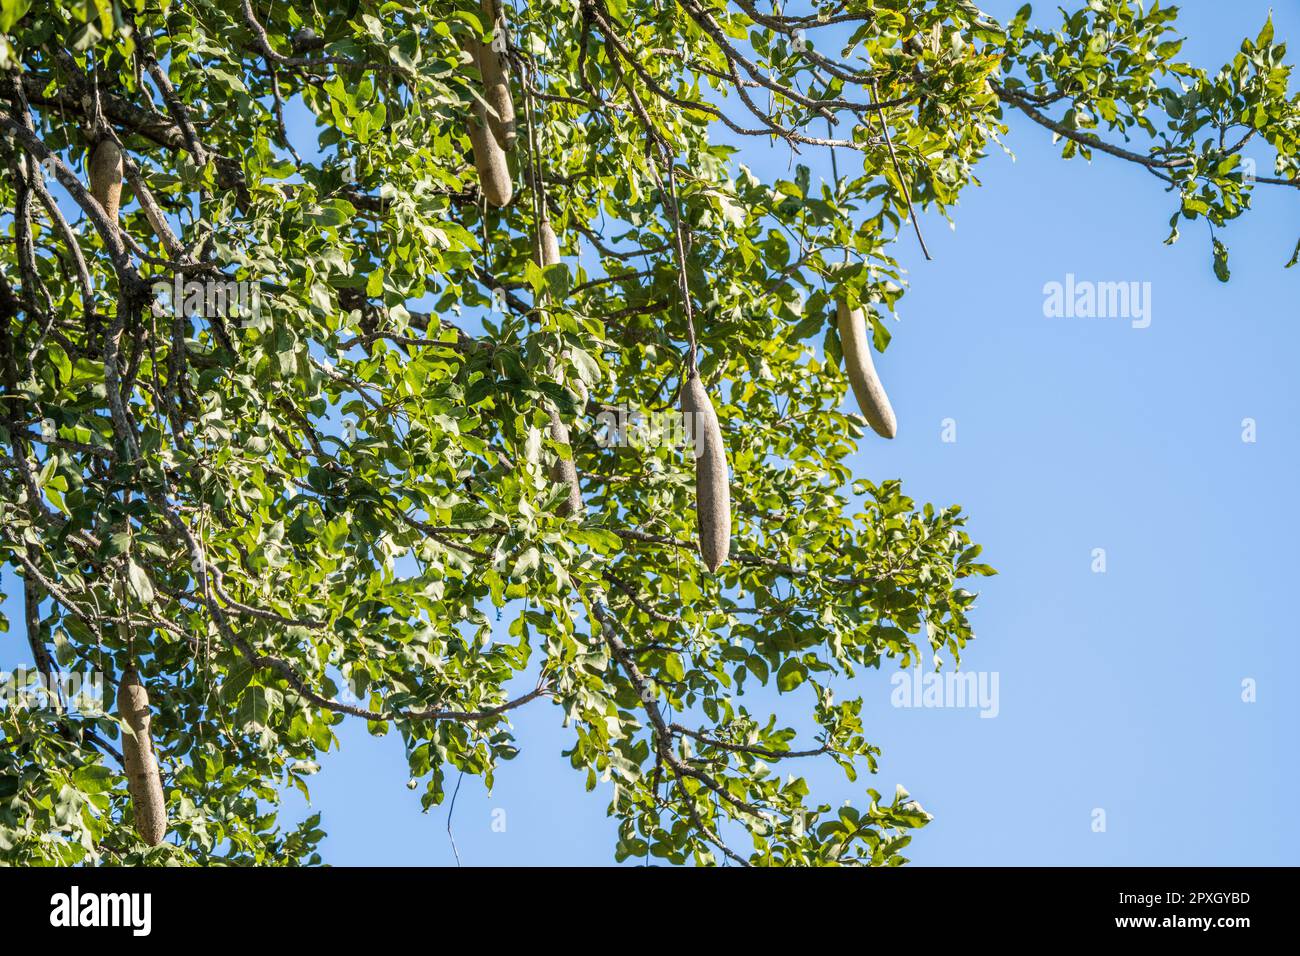 Sausage tree, (Kigelia africana), fruit hanging from the branches against blue sky. Caprivi Strip, Namibia, Africa Stock Photo